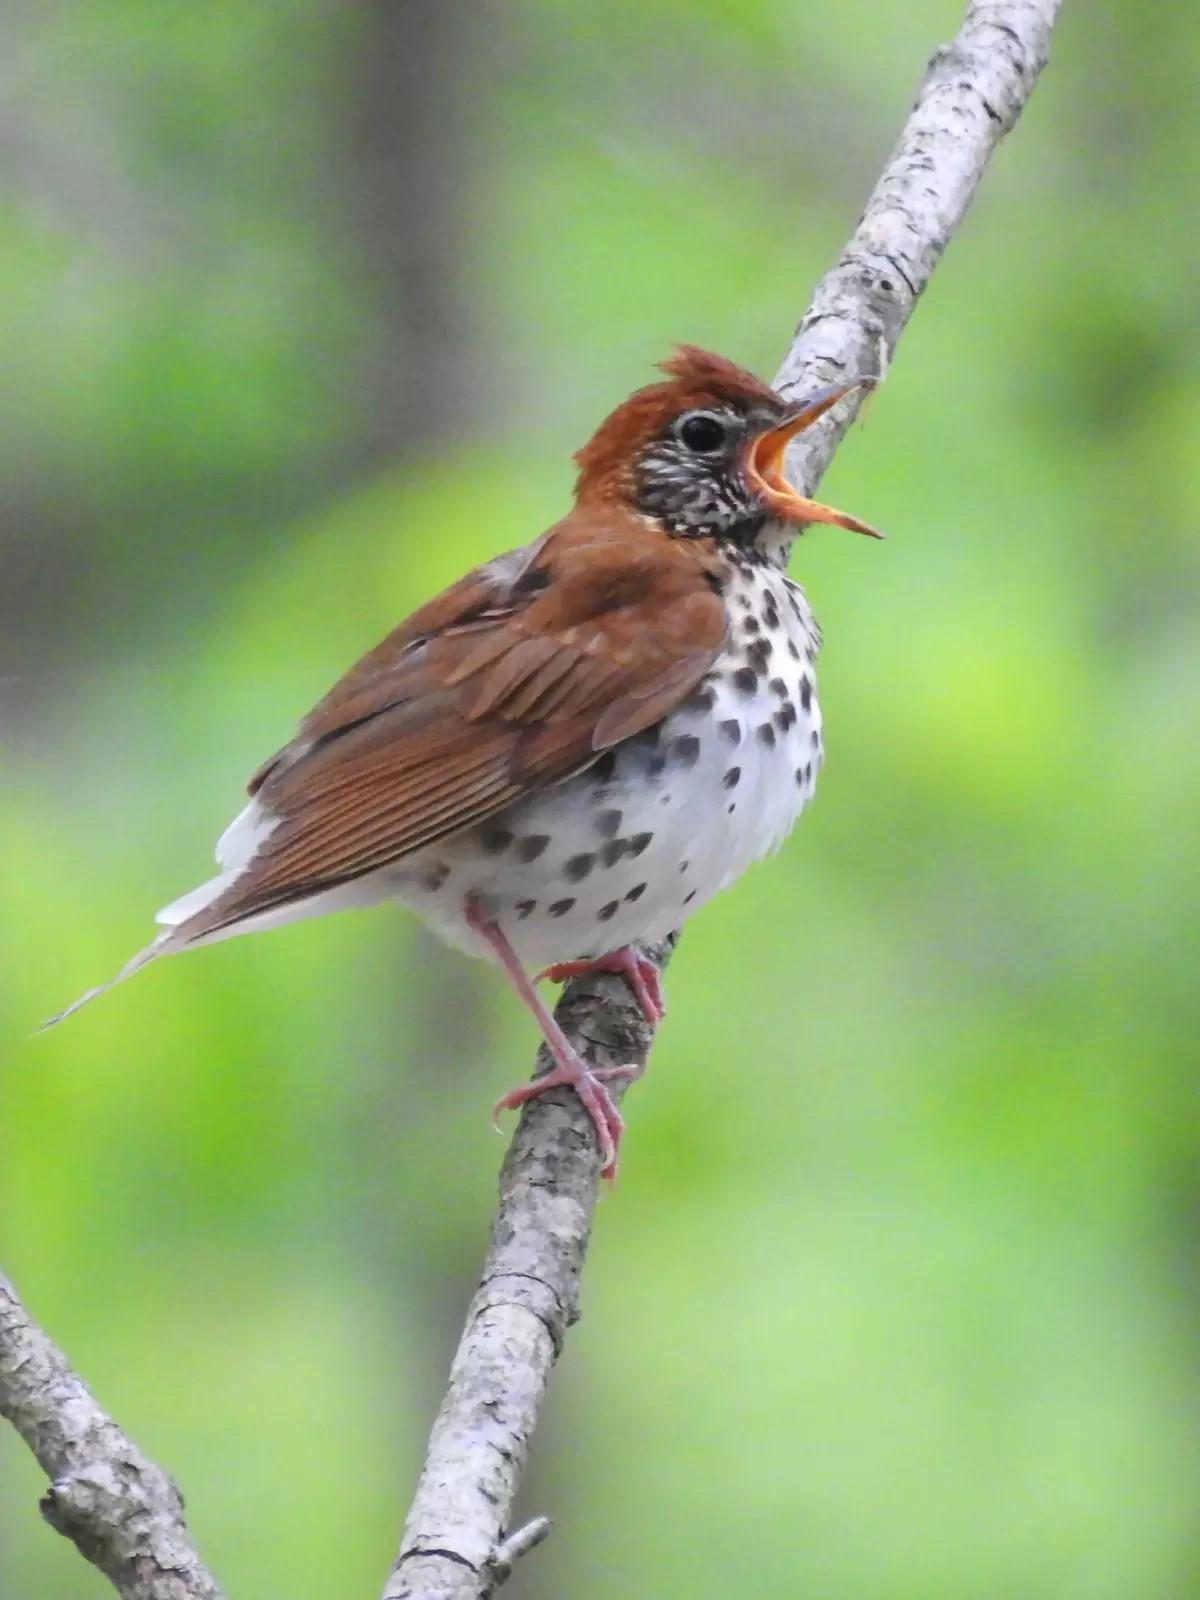 Photograph of a wood thrush on a branch.